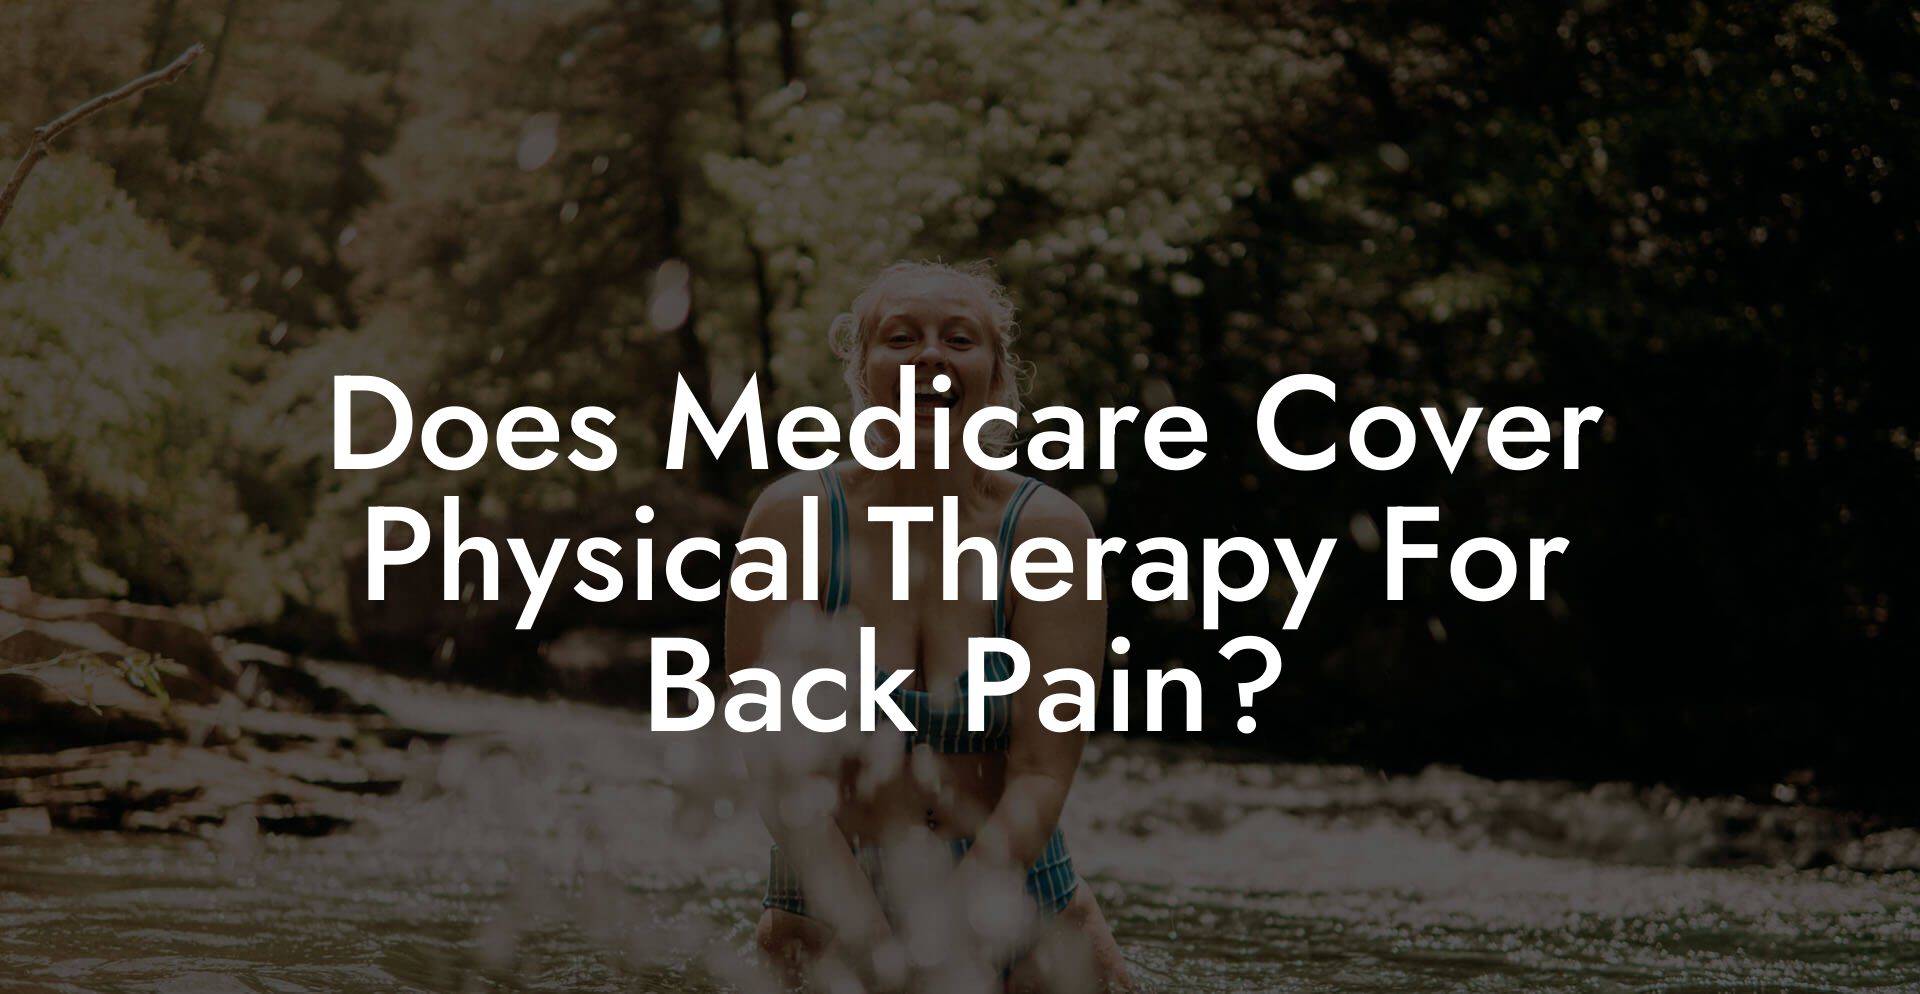 Does Medicare Cover Physical Therapy For Back Pain?